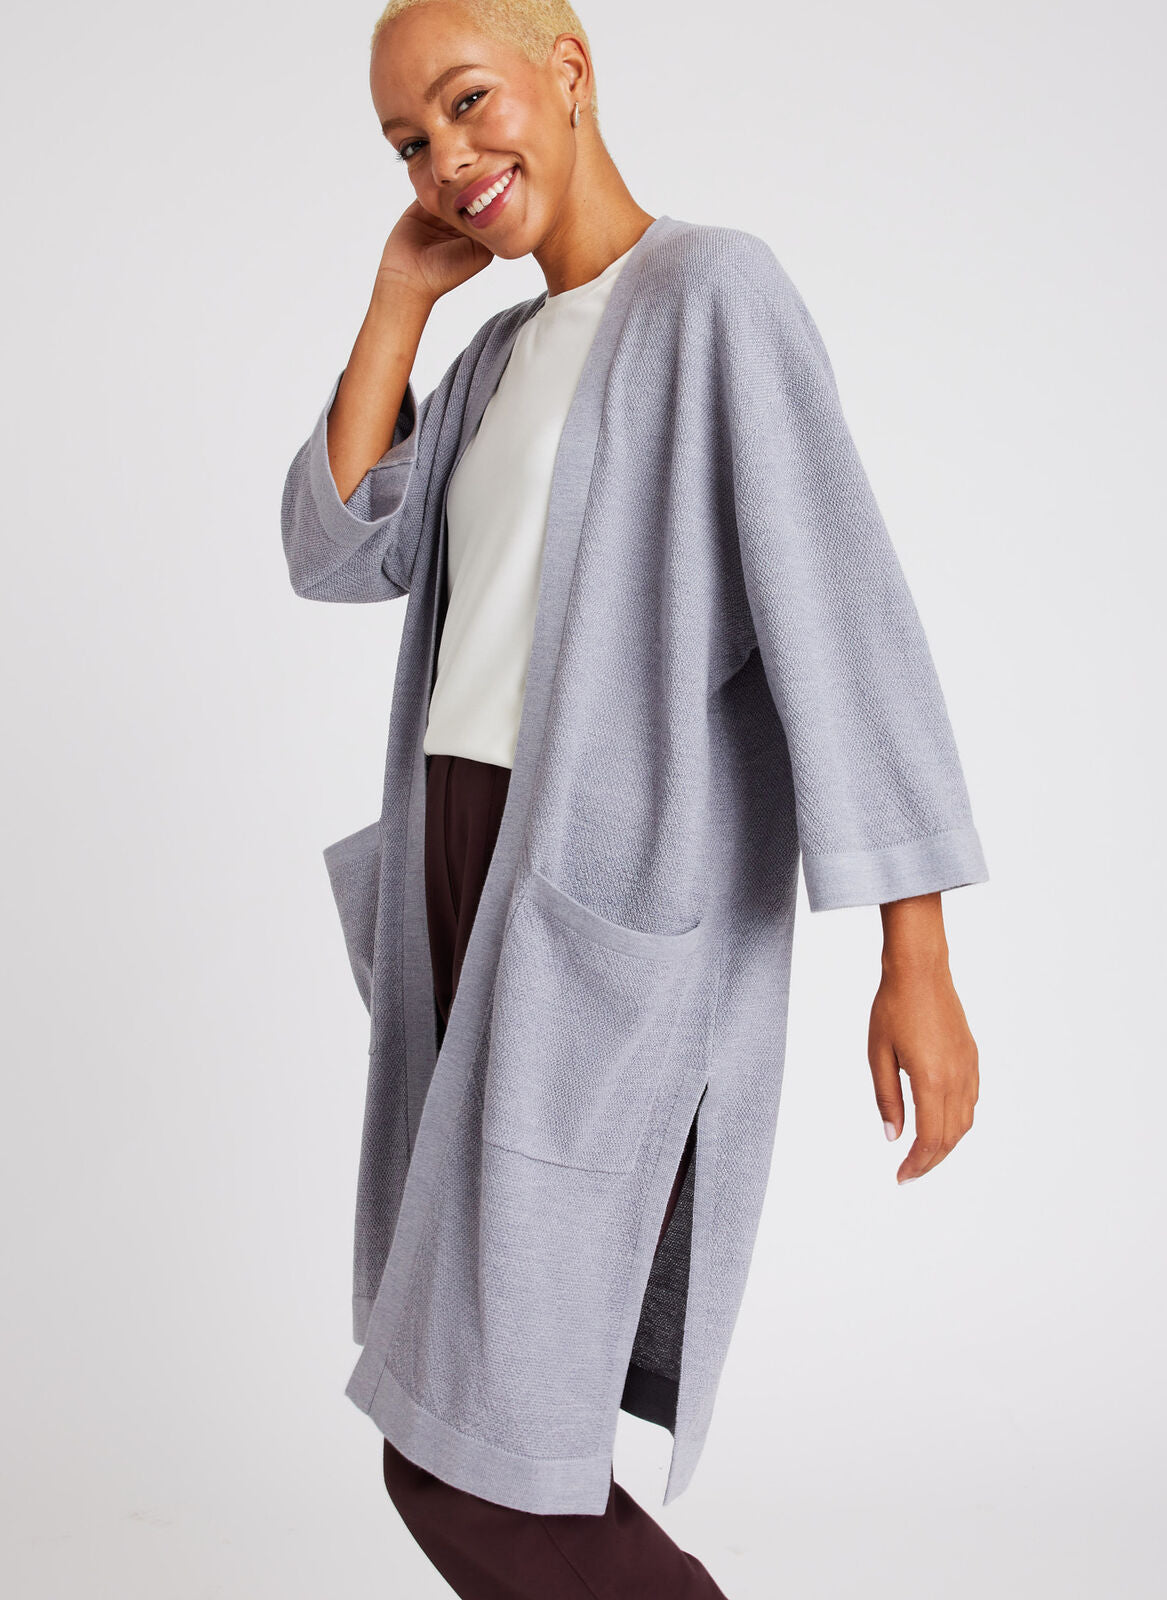 Kit and Ace — In the Clouds Wrap Cardigan